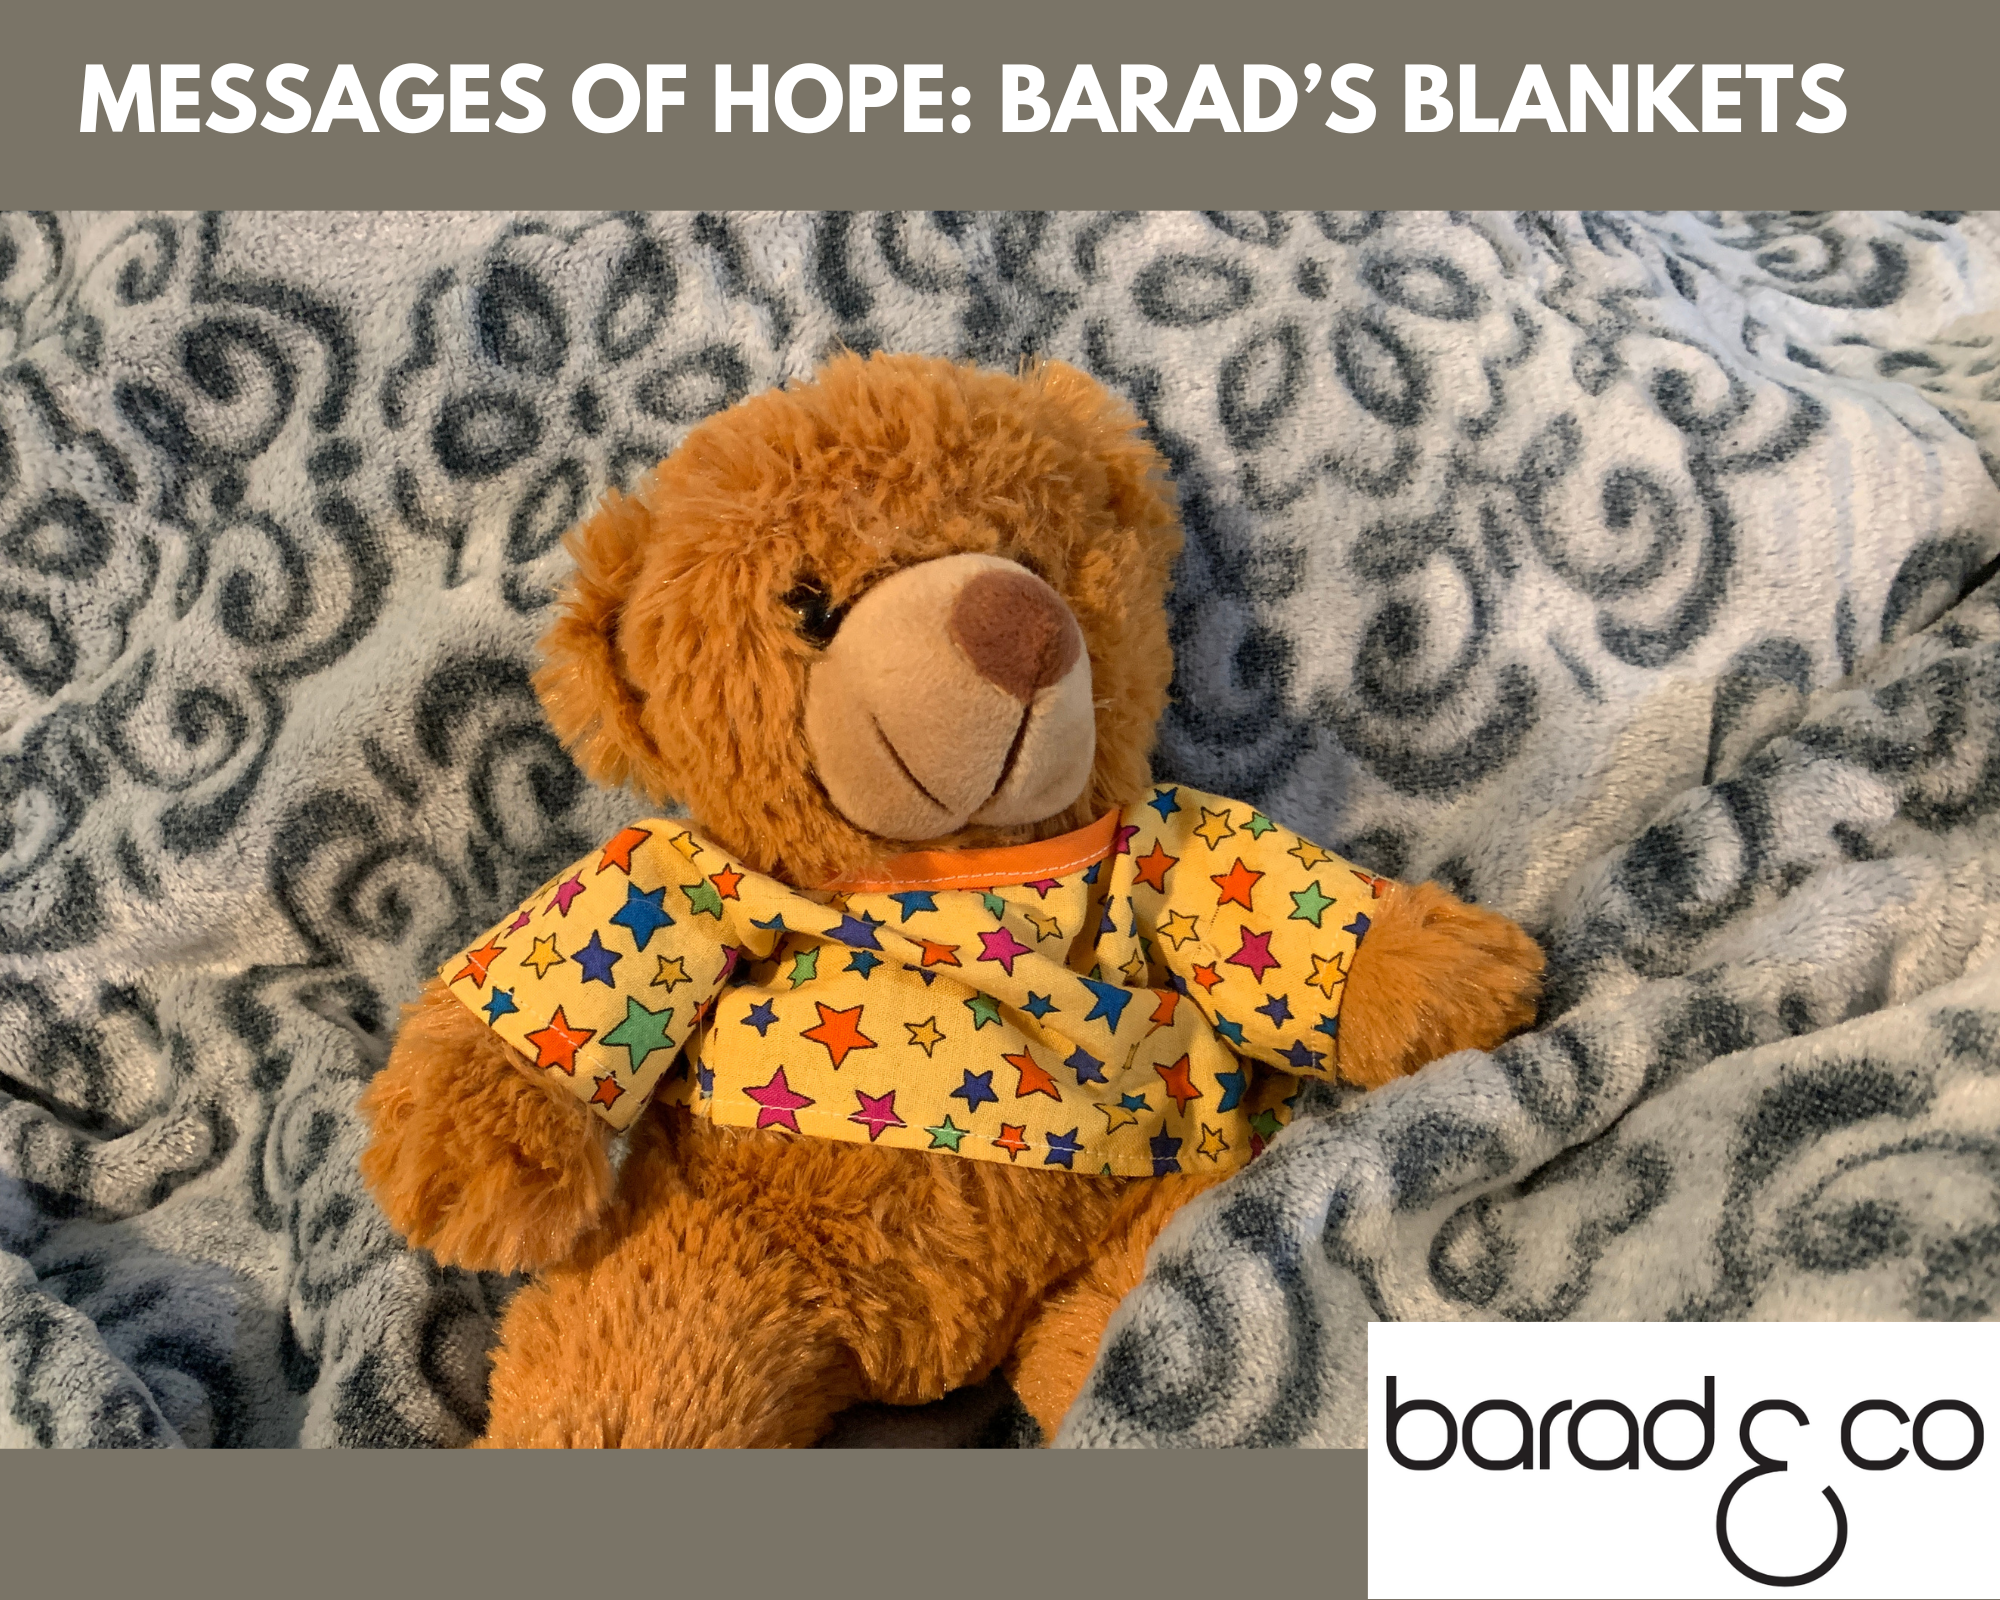 Hope the bear is snuggly in Barad's Blanket